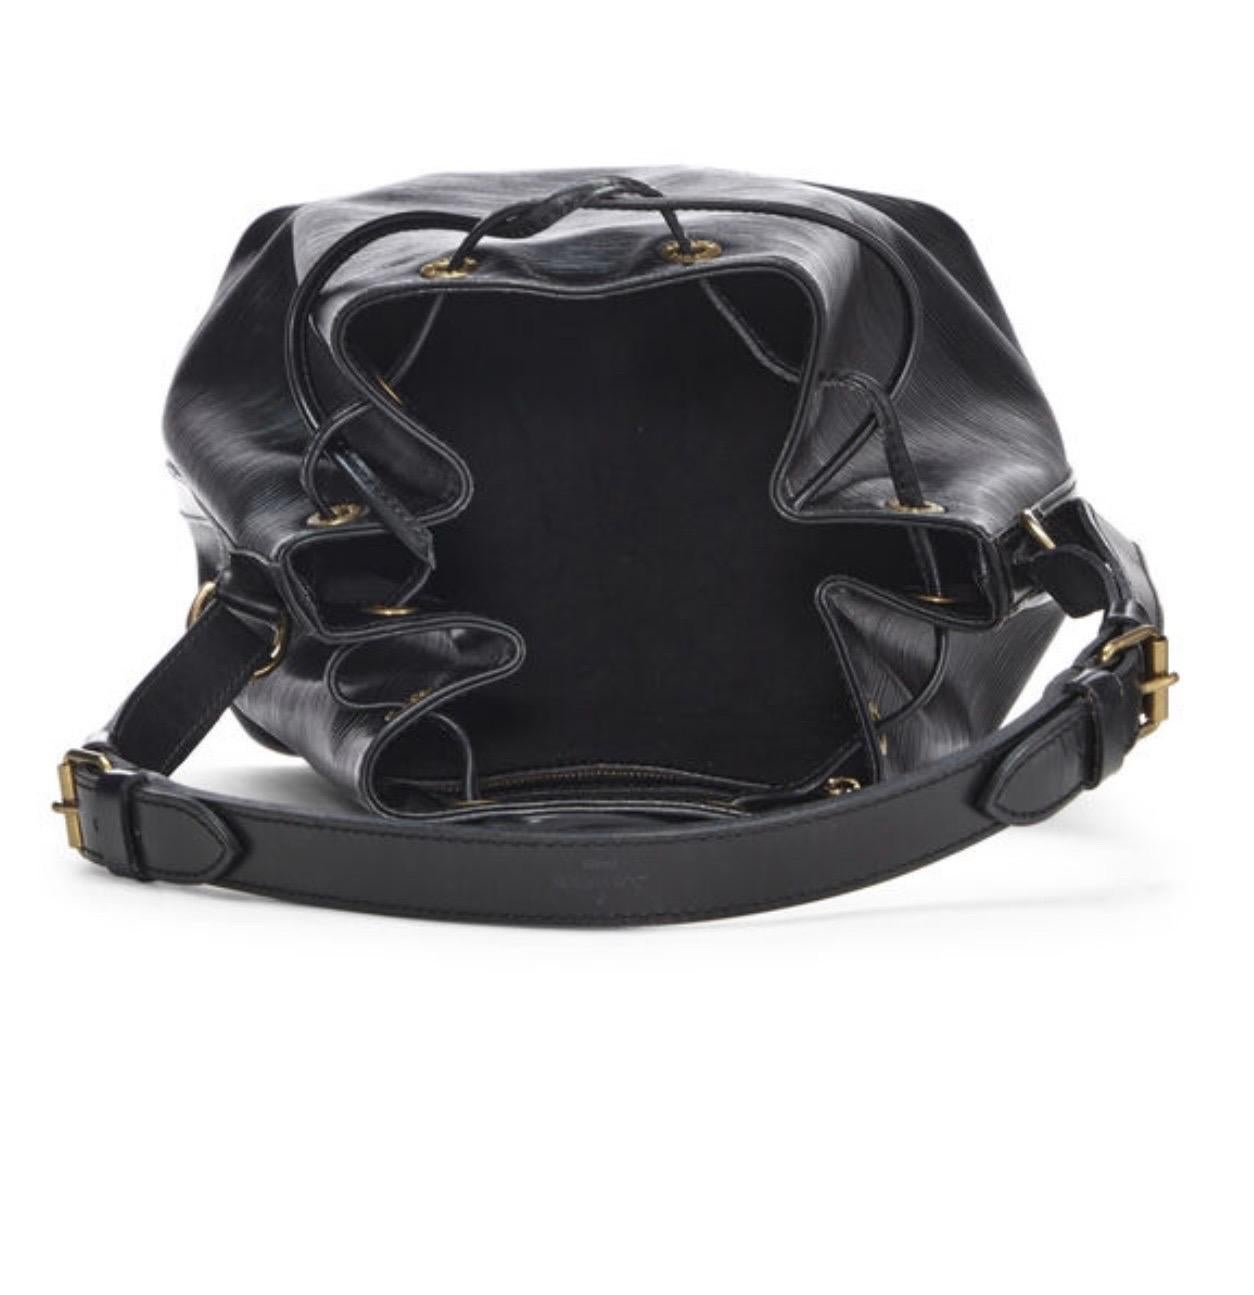 If there are any unspoken accessorizing rules, it's that a bucket bag is a must in any wardrobe. Stylish and sleek, this Noé bucket silhouette by Louis Vuitton is crafted from the maison's striated Epi leather with gold-tone brass hardware